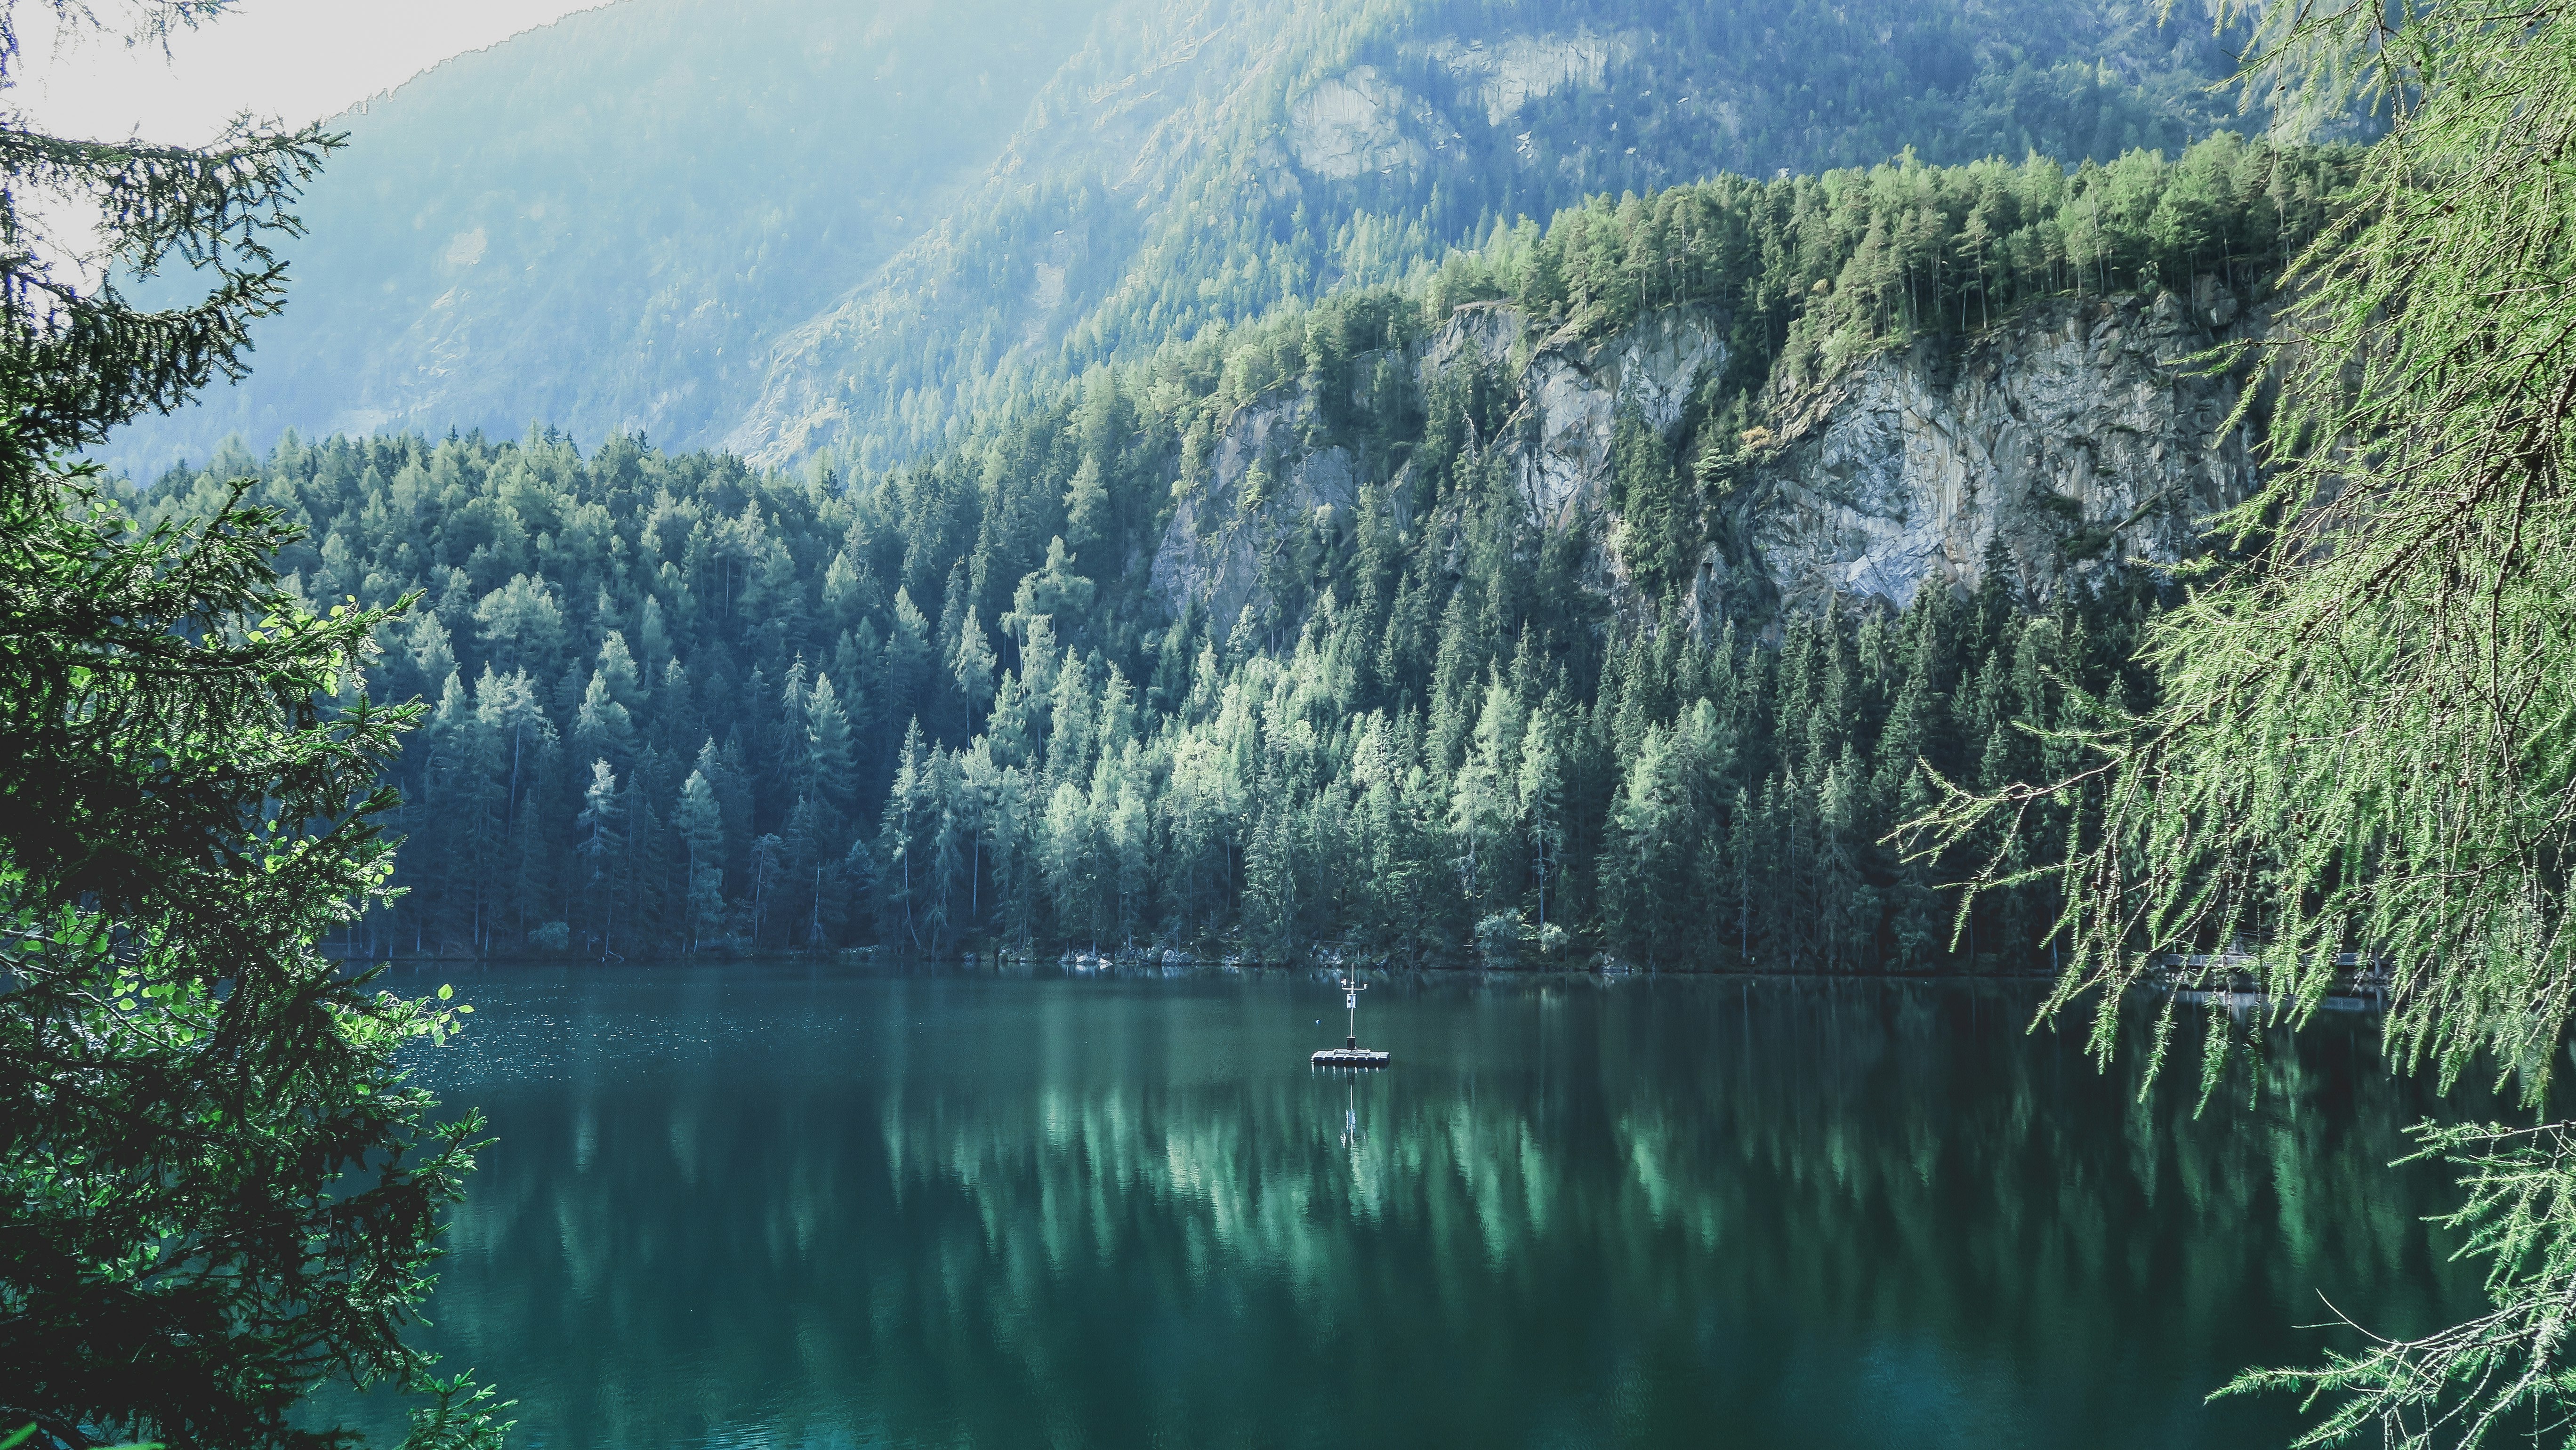 photo of calm body of water surrounded by trees